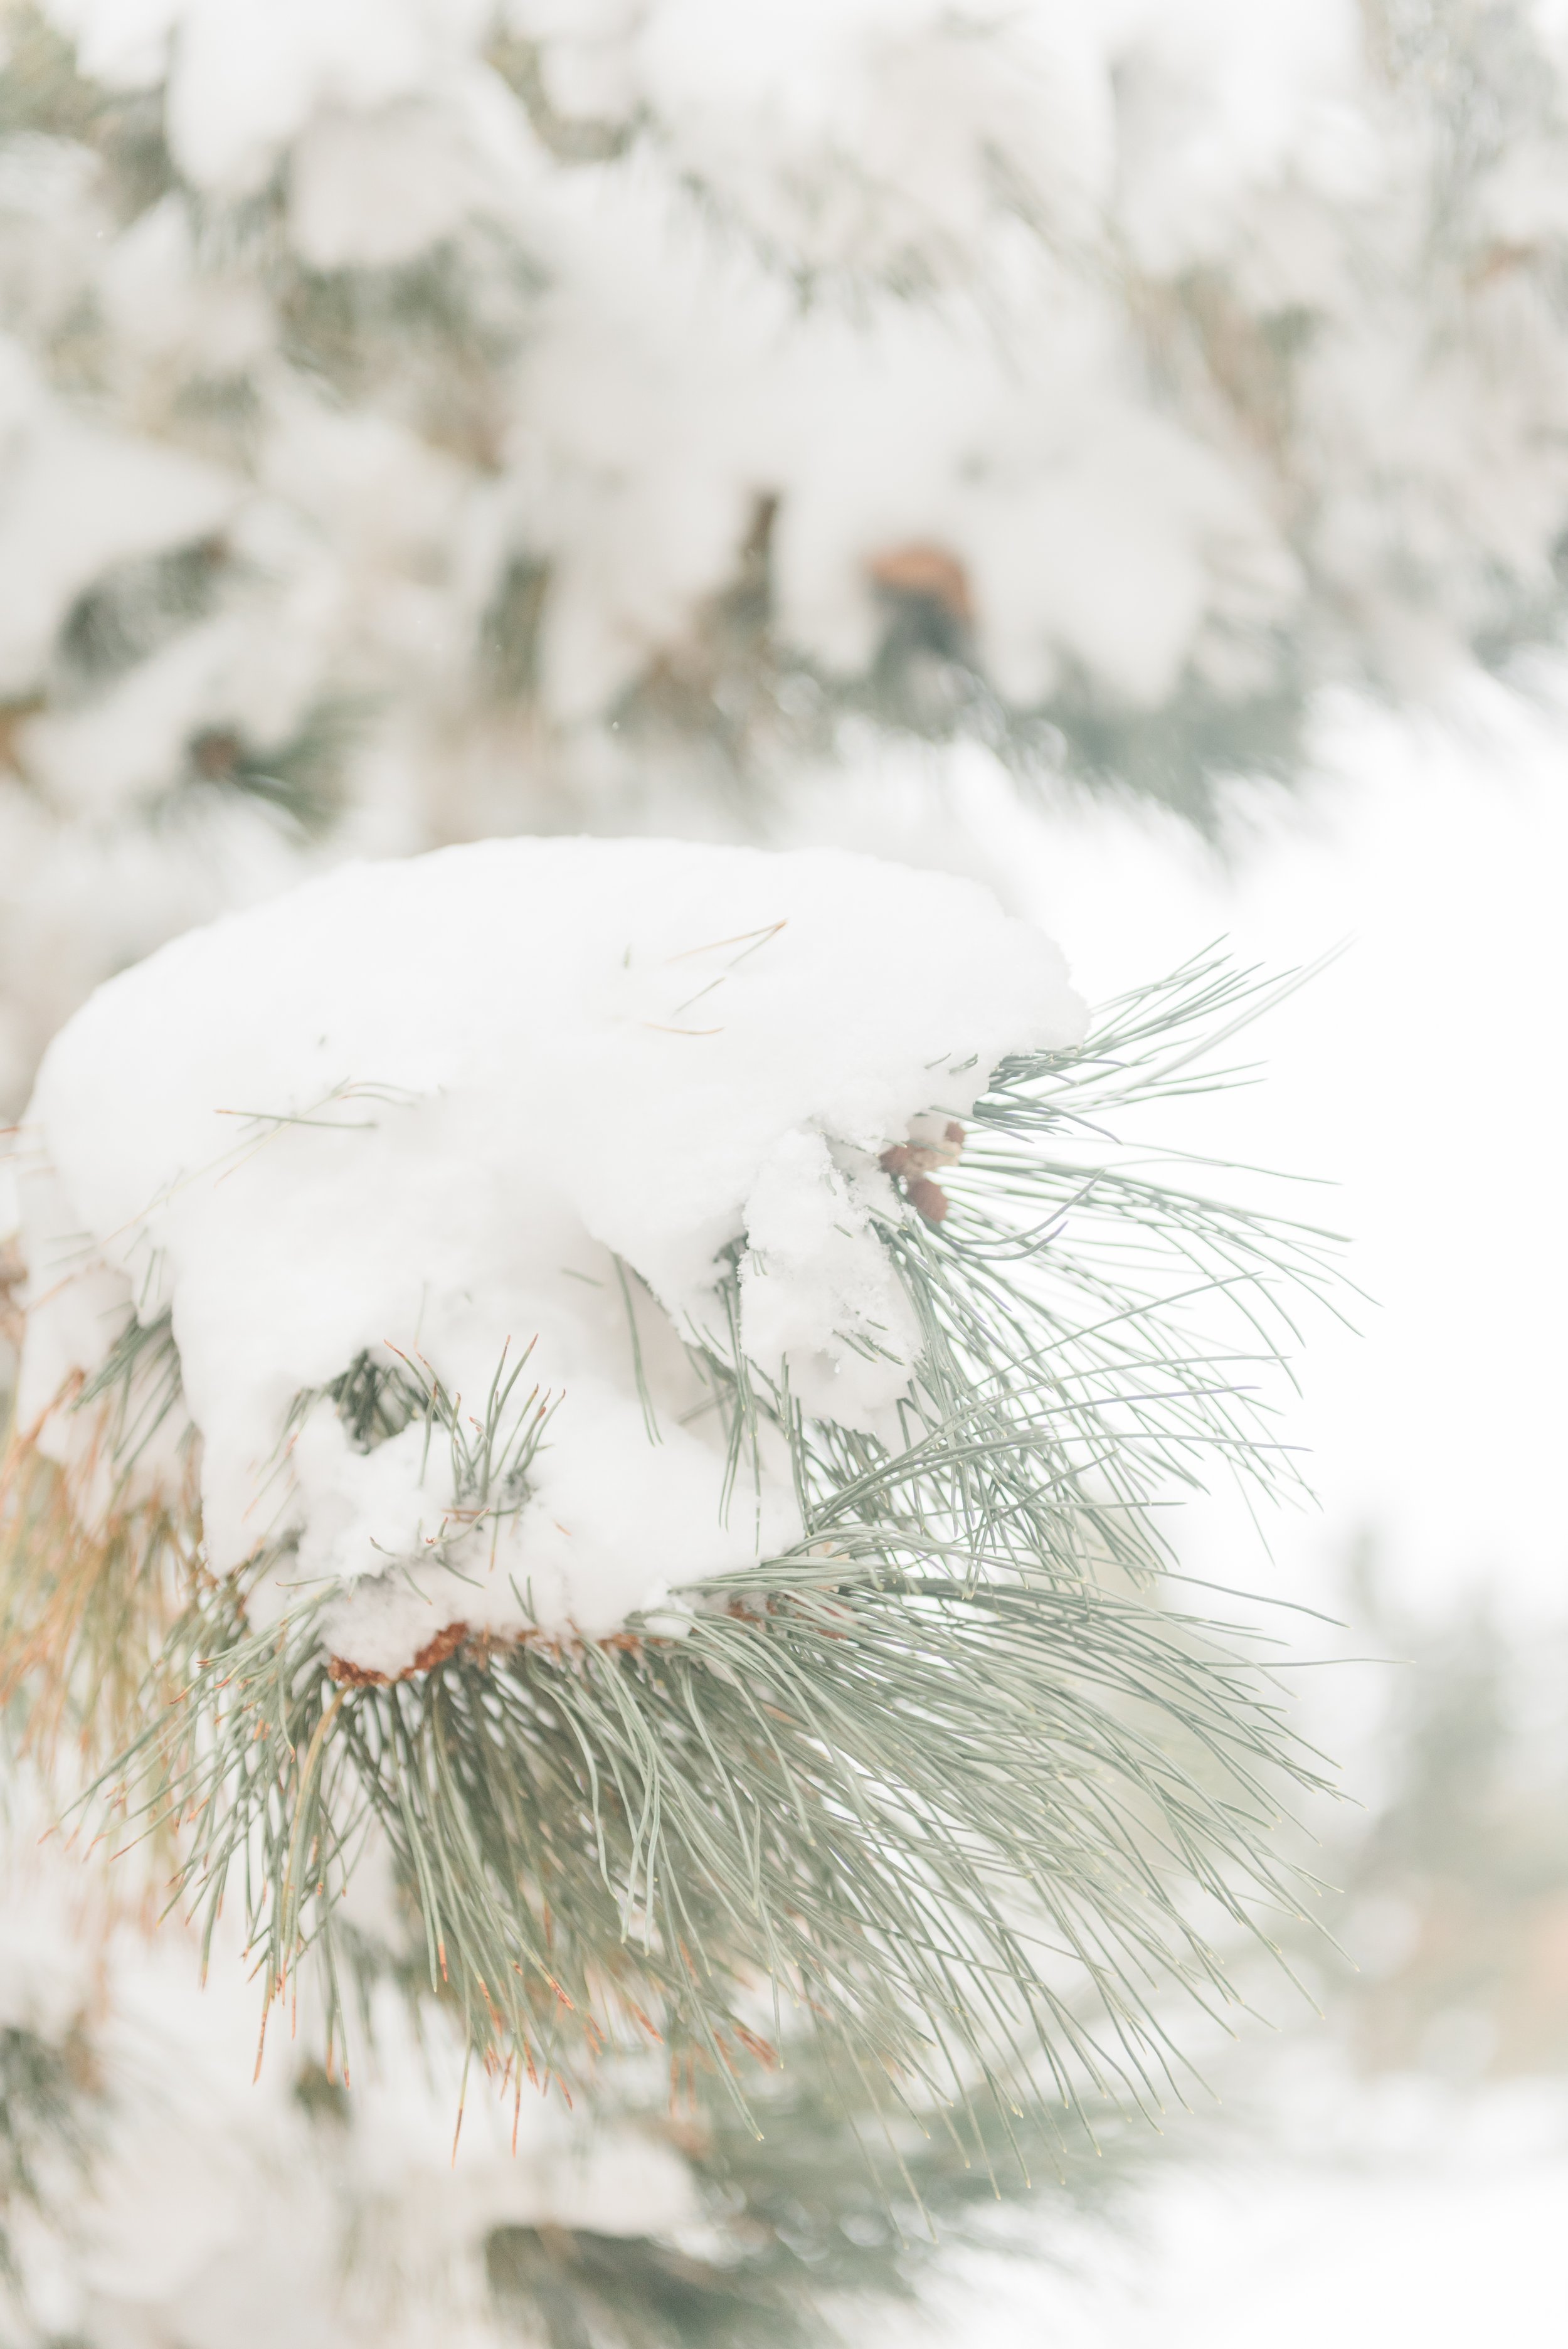  A close-up shot of a snow-covered bough is captured during a wedding session photographed by Atlanta-based wedding photographer, Jacquie Erickson. Snowy wedding detail photos wedding photography timeline&nbsp; #weddingphotographytimeline #stressfree